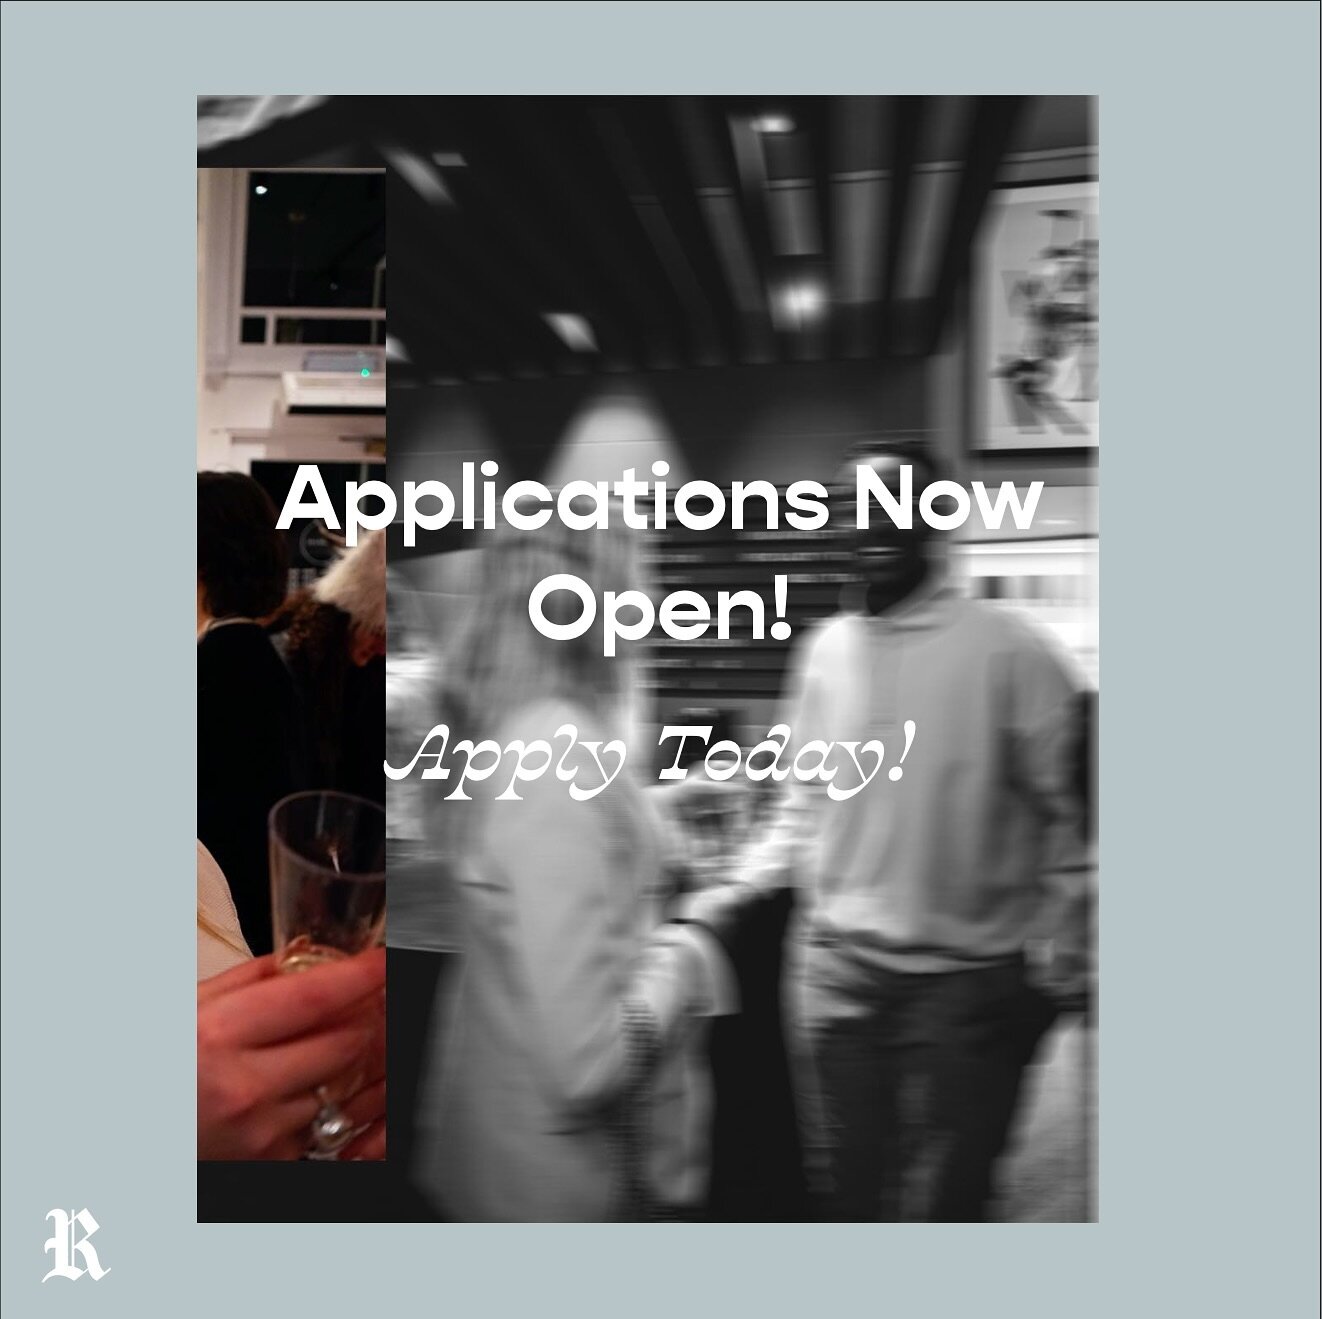 We are now accepting applications! All applicants must have their forms in by Friday February 9th.

Apply today!

Link in bio 

Photo taken by: @isthisgreg